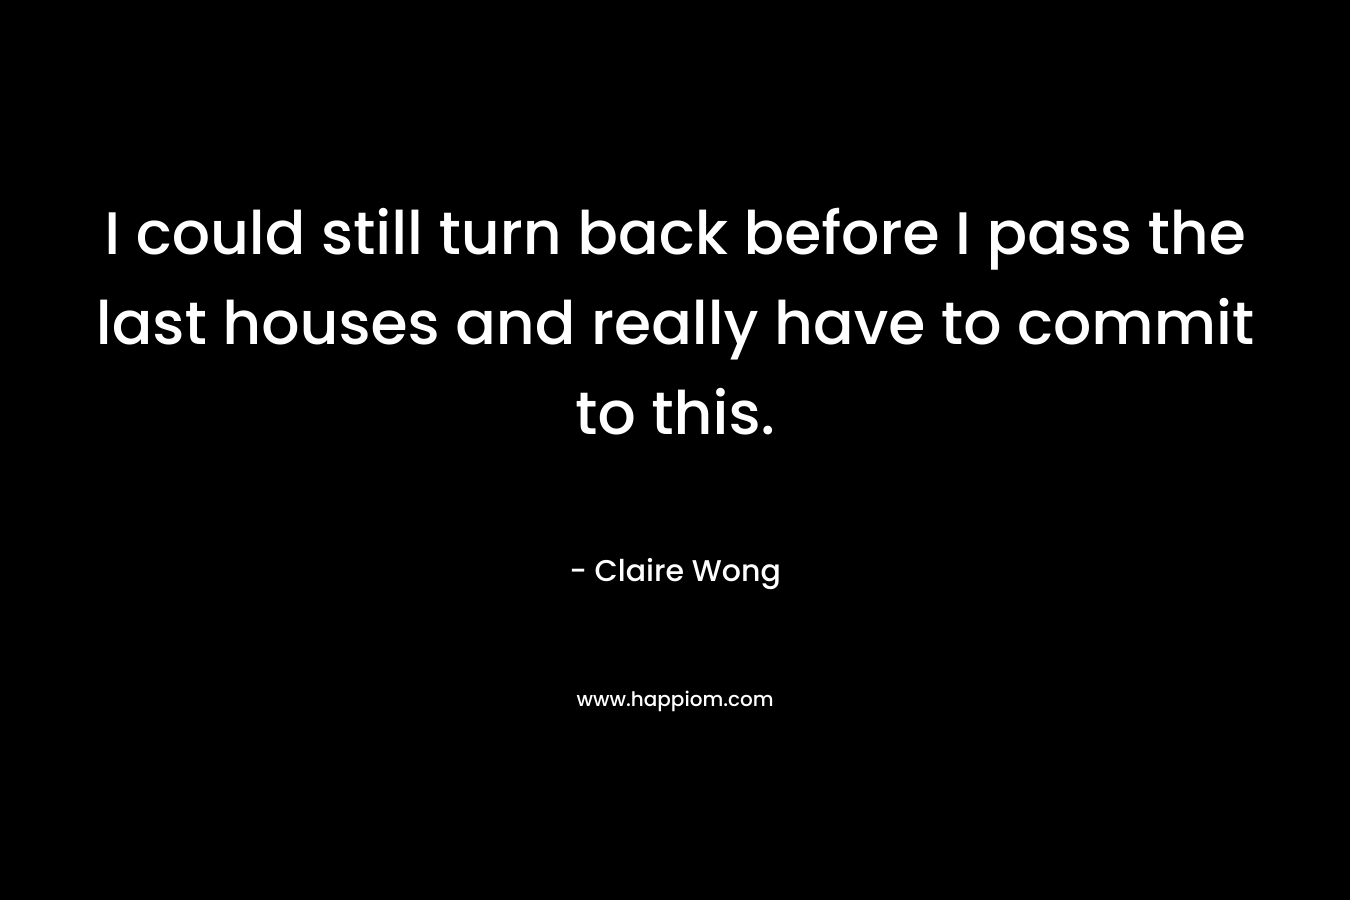 I could still turn back before I pass the last houses and really have to commit to this. – Claire Wong